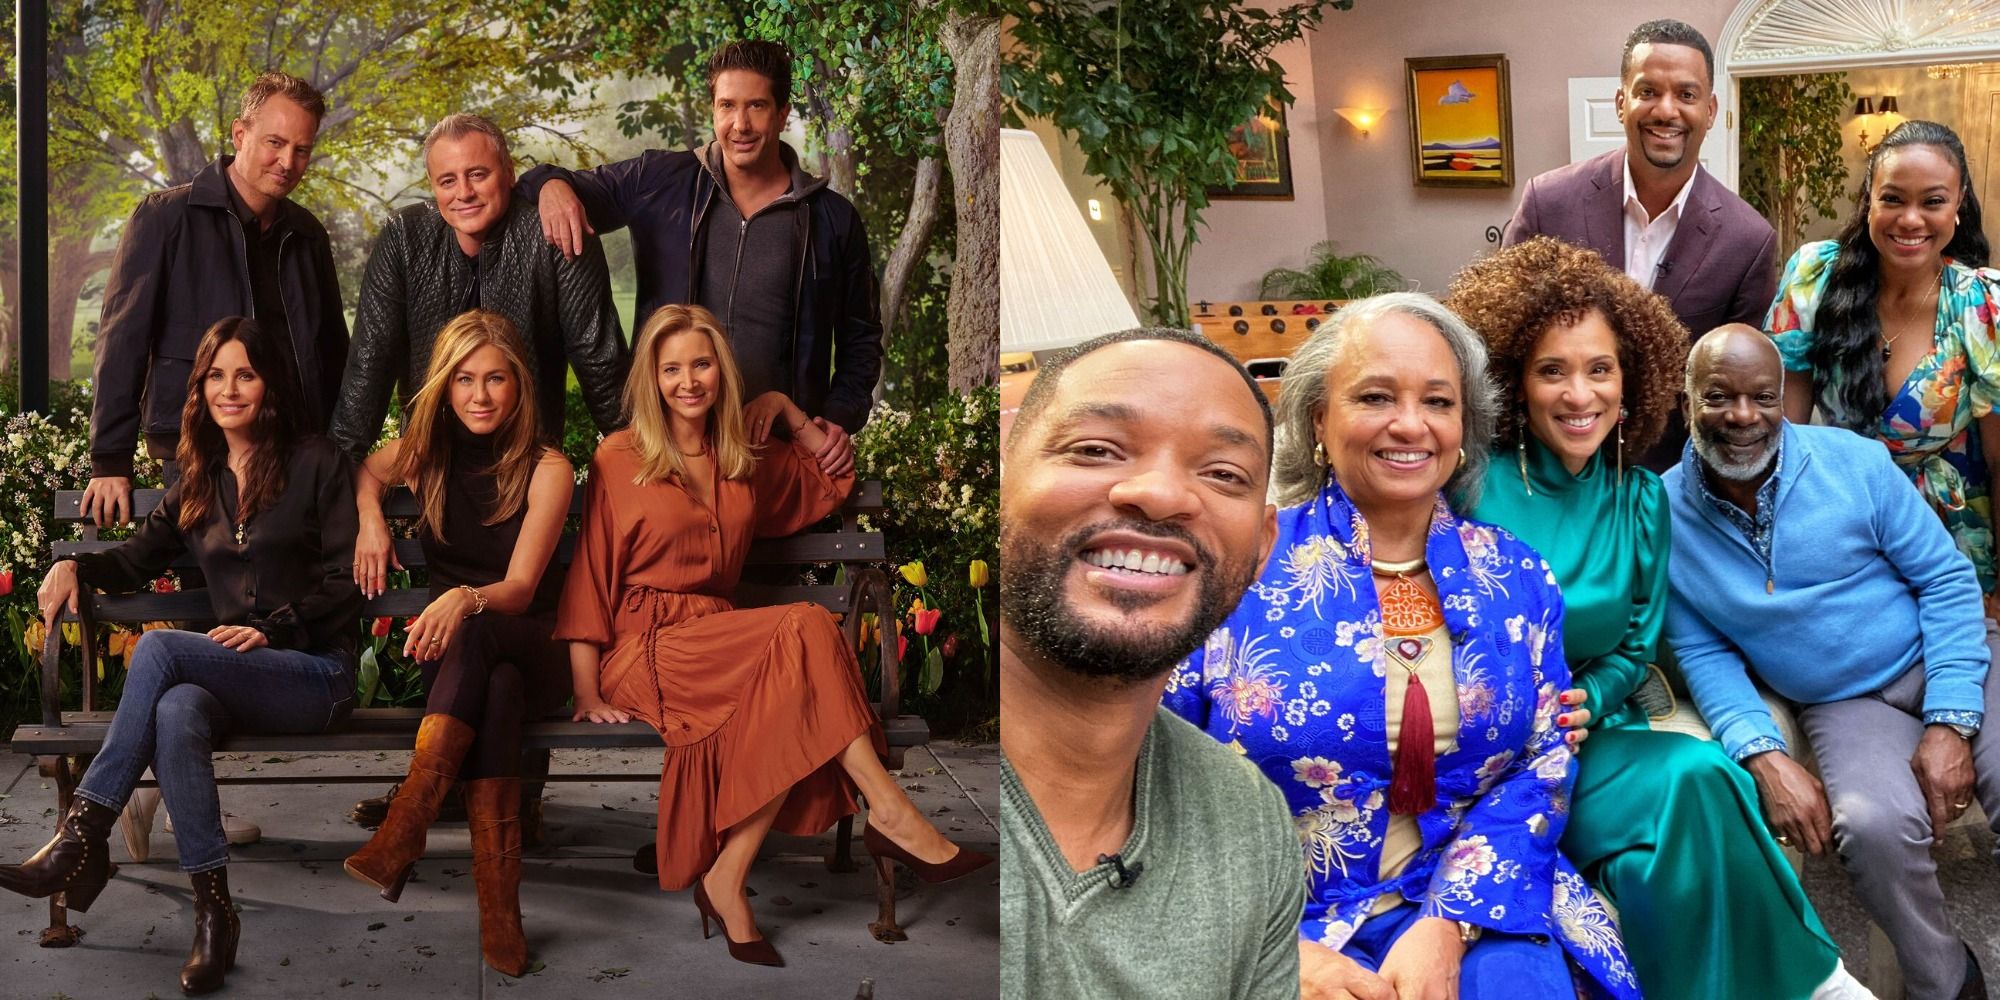 cast of the reunion